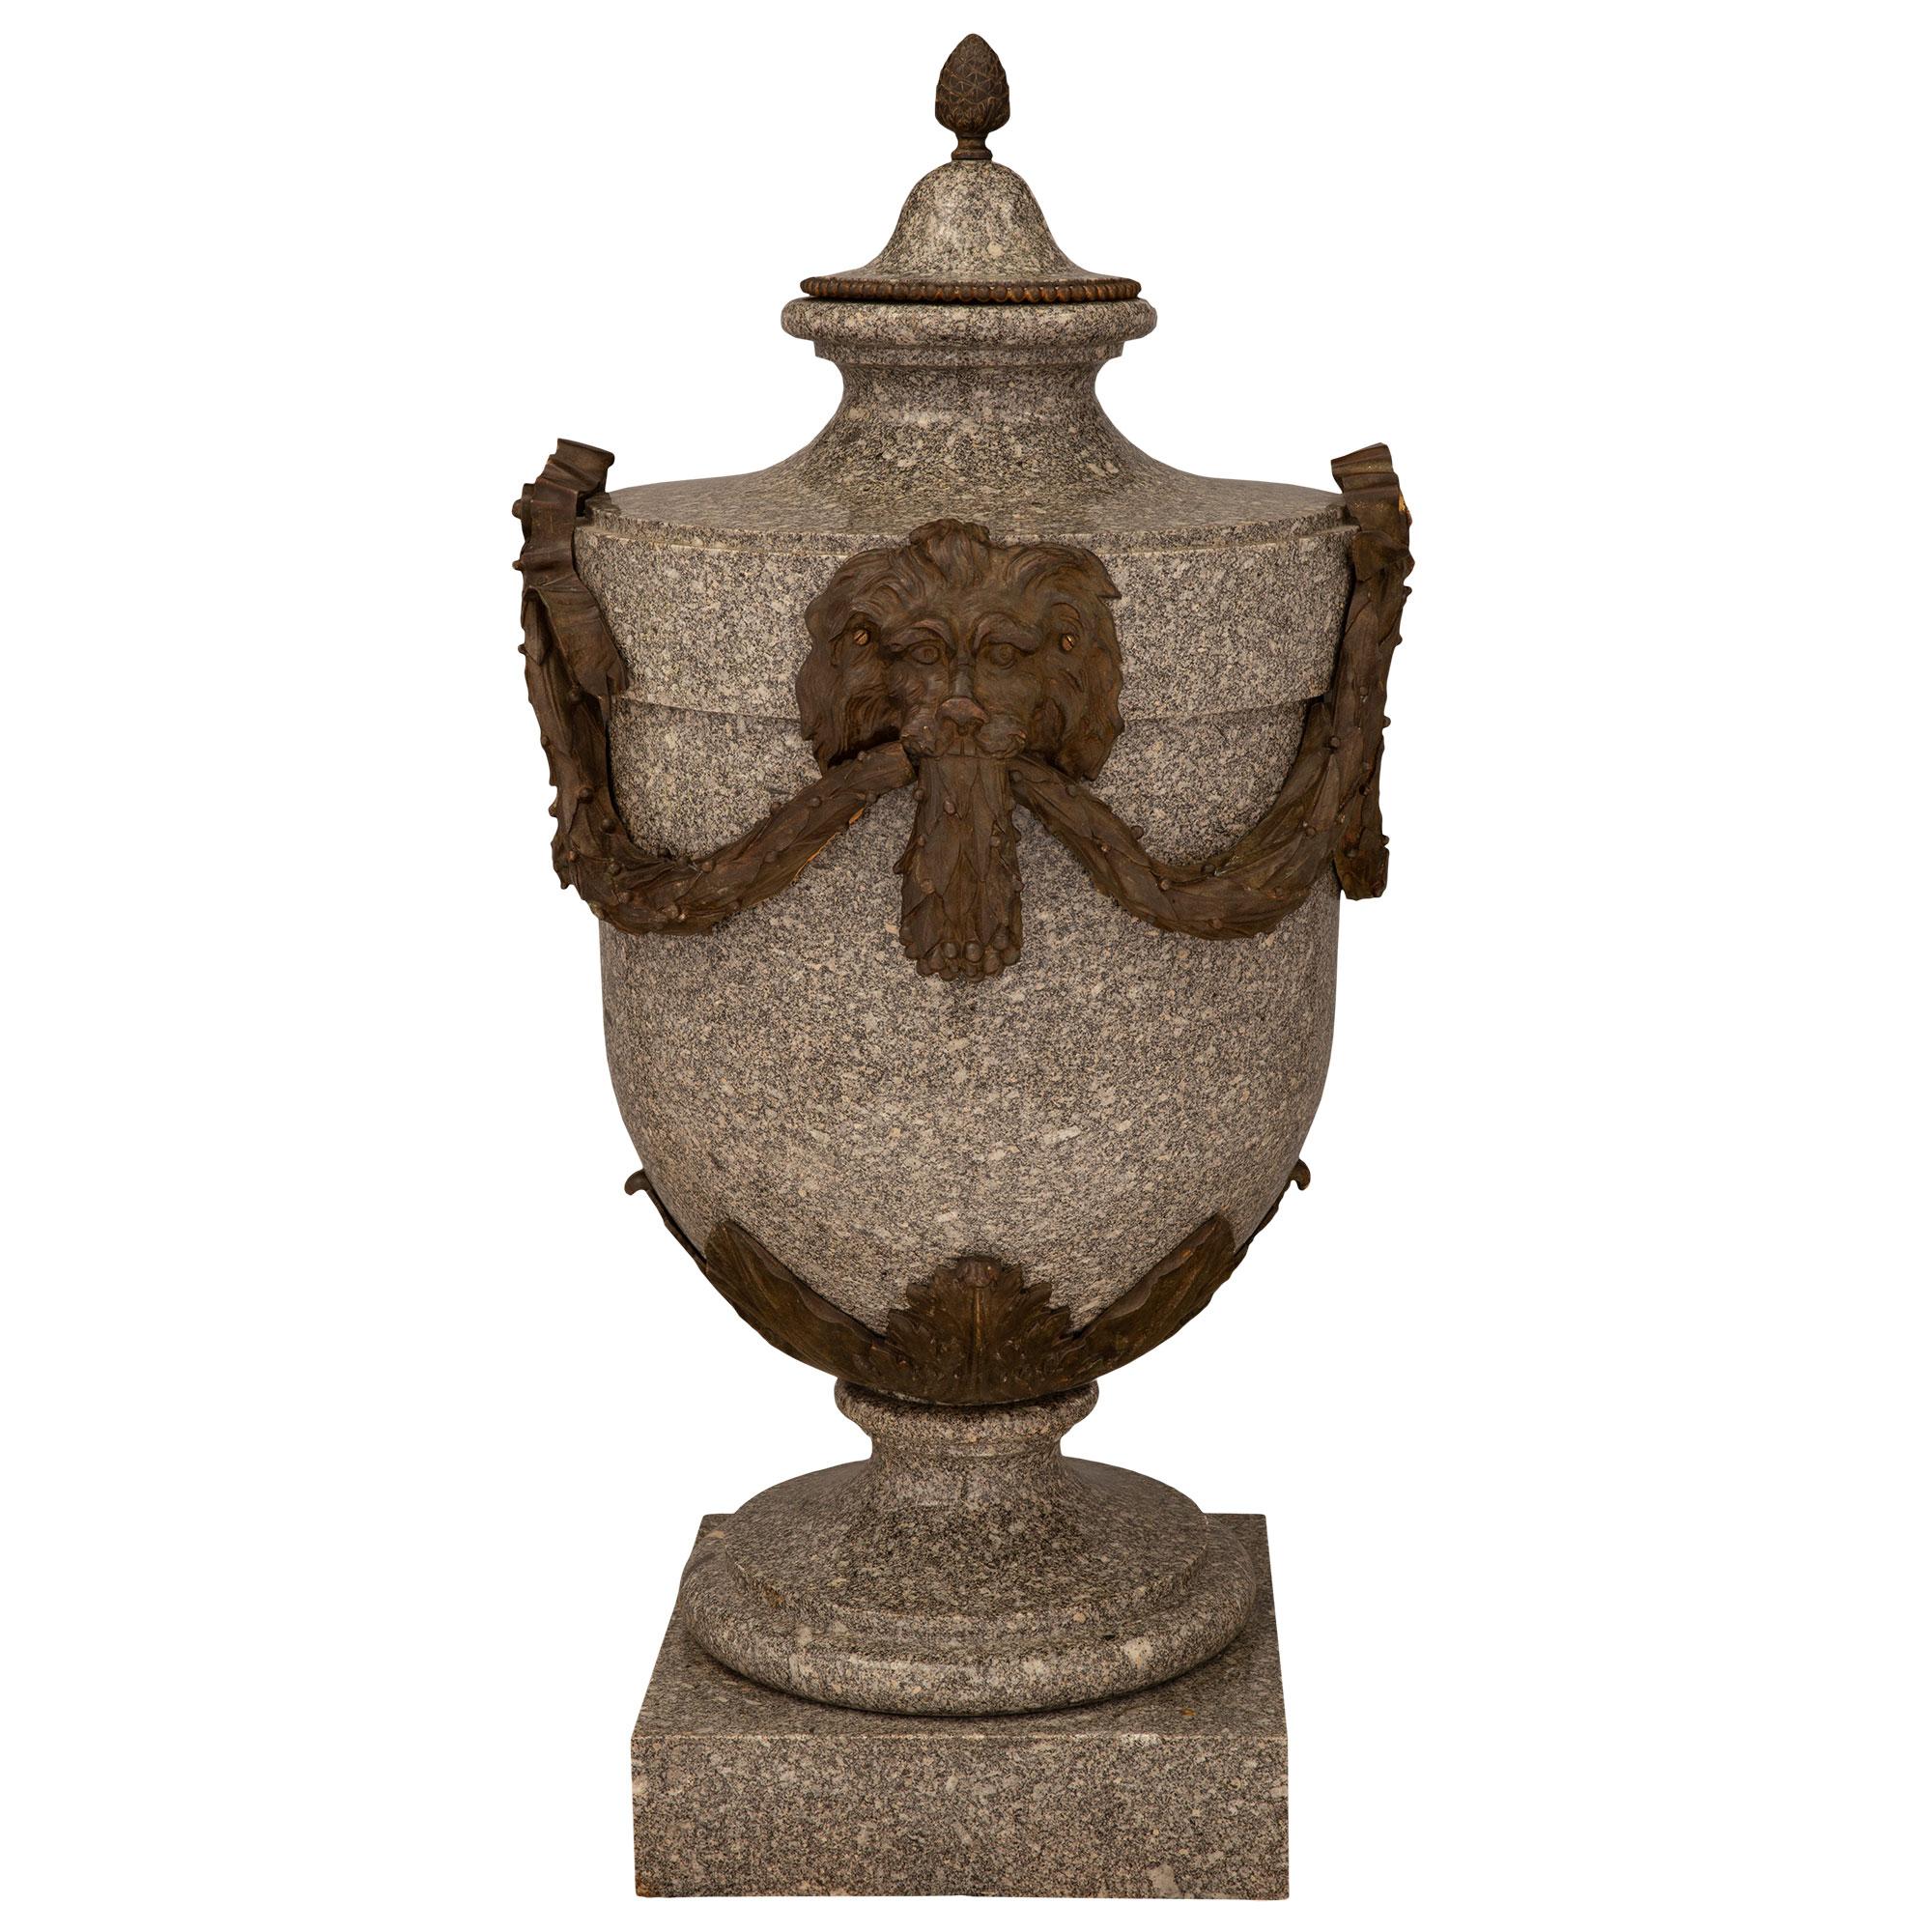 A most impressive and large scale French 19th century Louis XVI st. granite and patinated bronze lidded urn. The urn is raised by a square granite base below the fine socle pedestal with an elegant mottled border. Large richly chased patinated